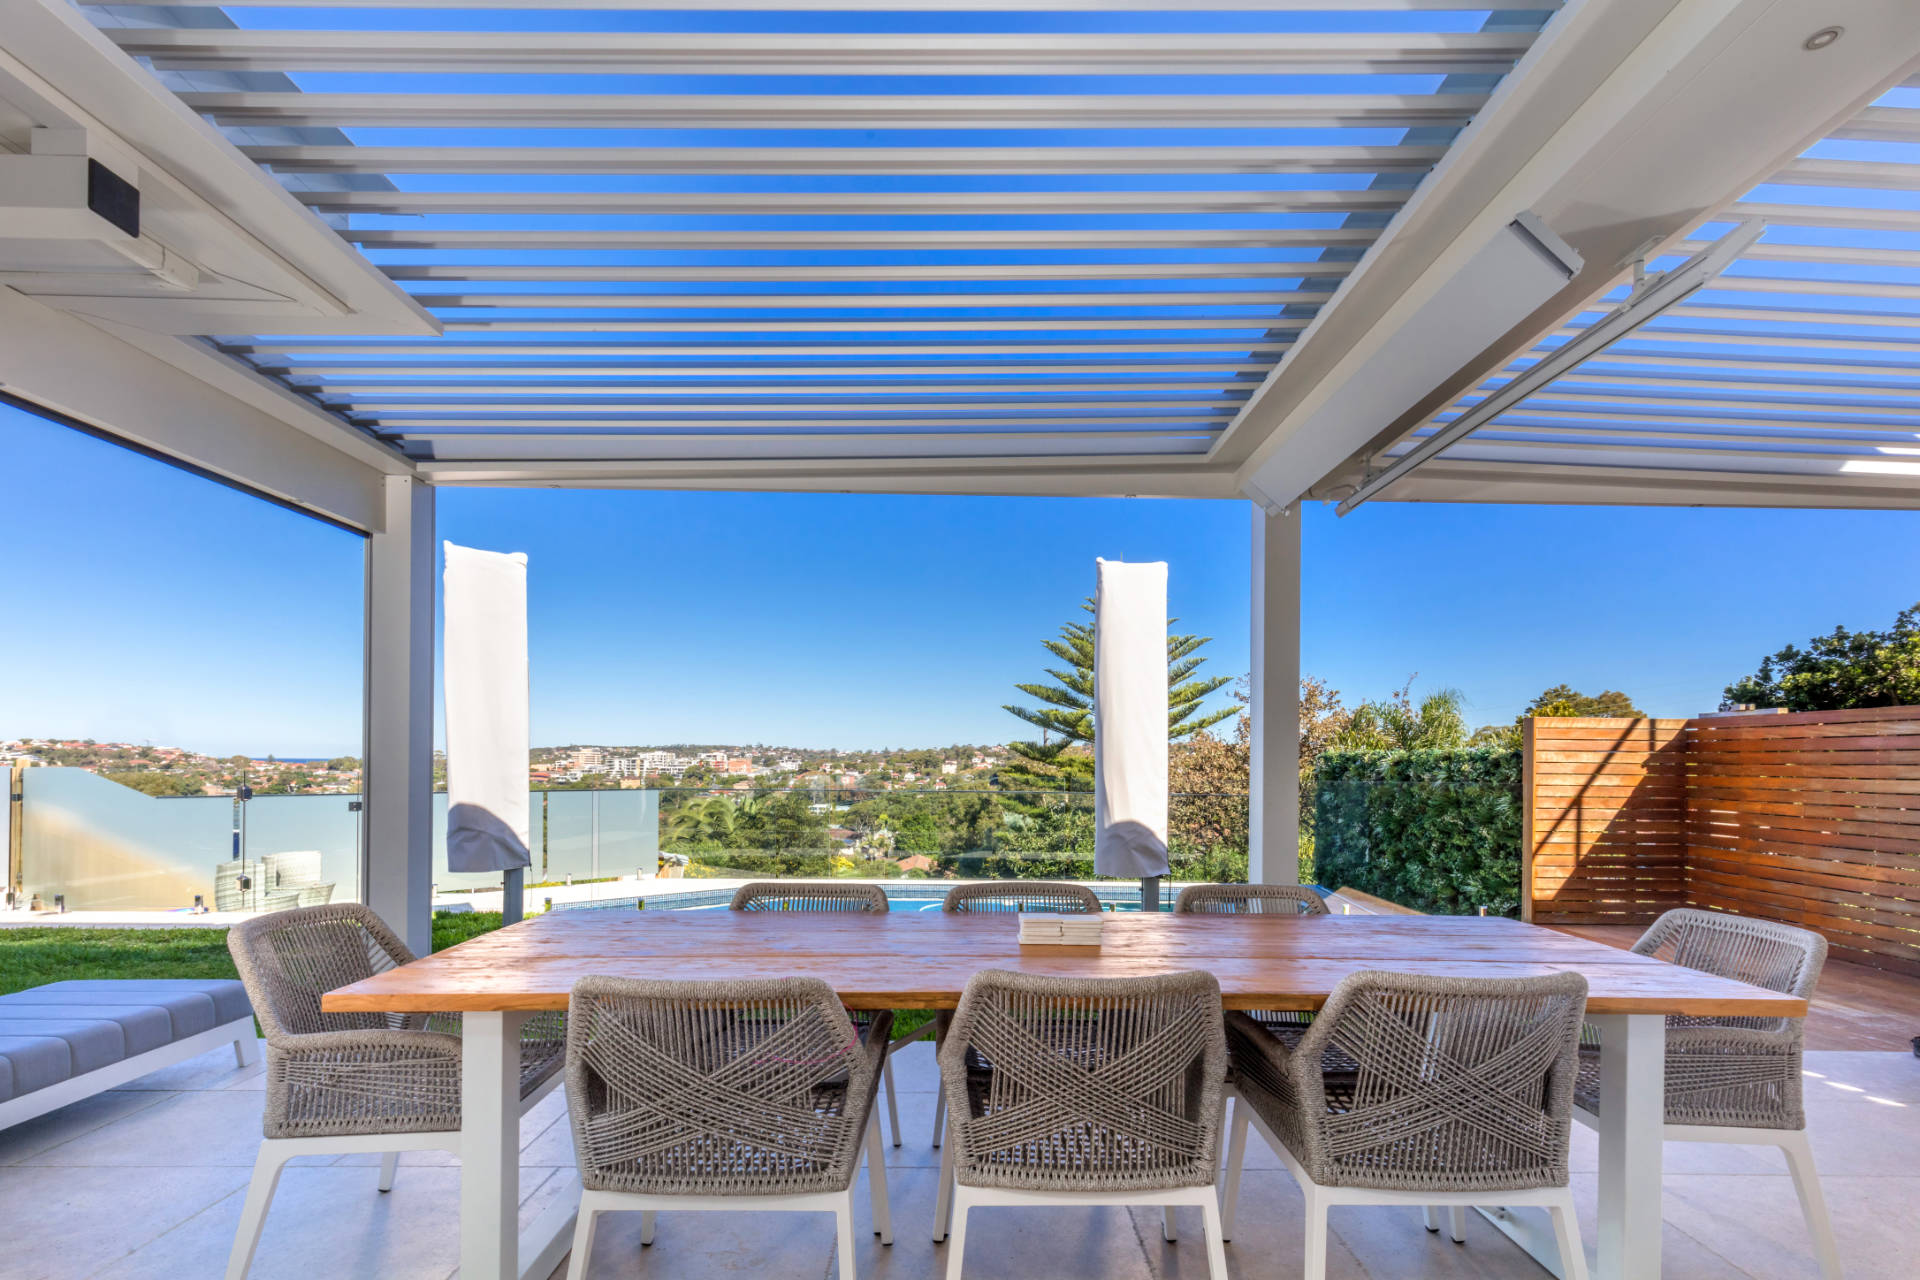 Automatic louvres in Manly Vale pergola dining area.